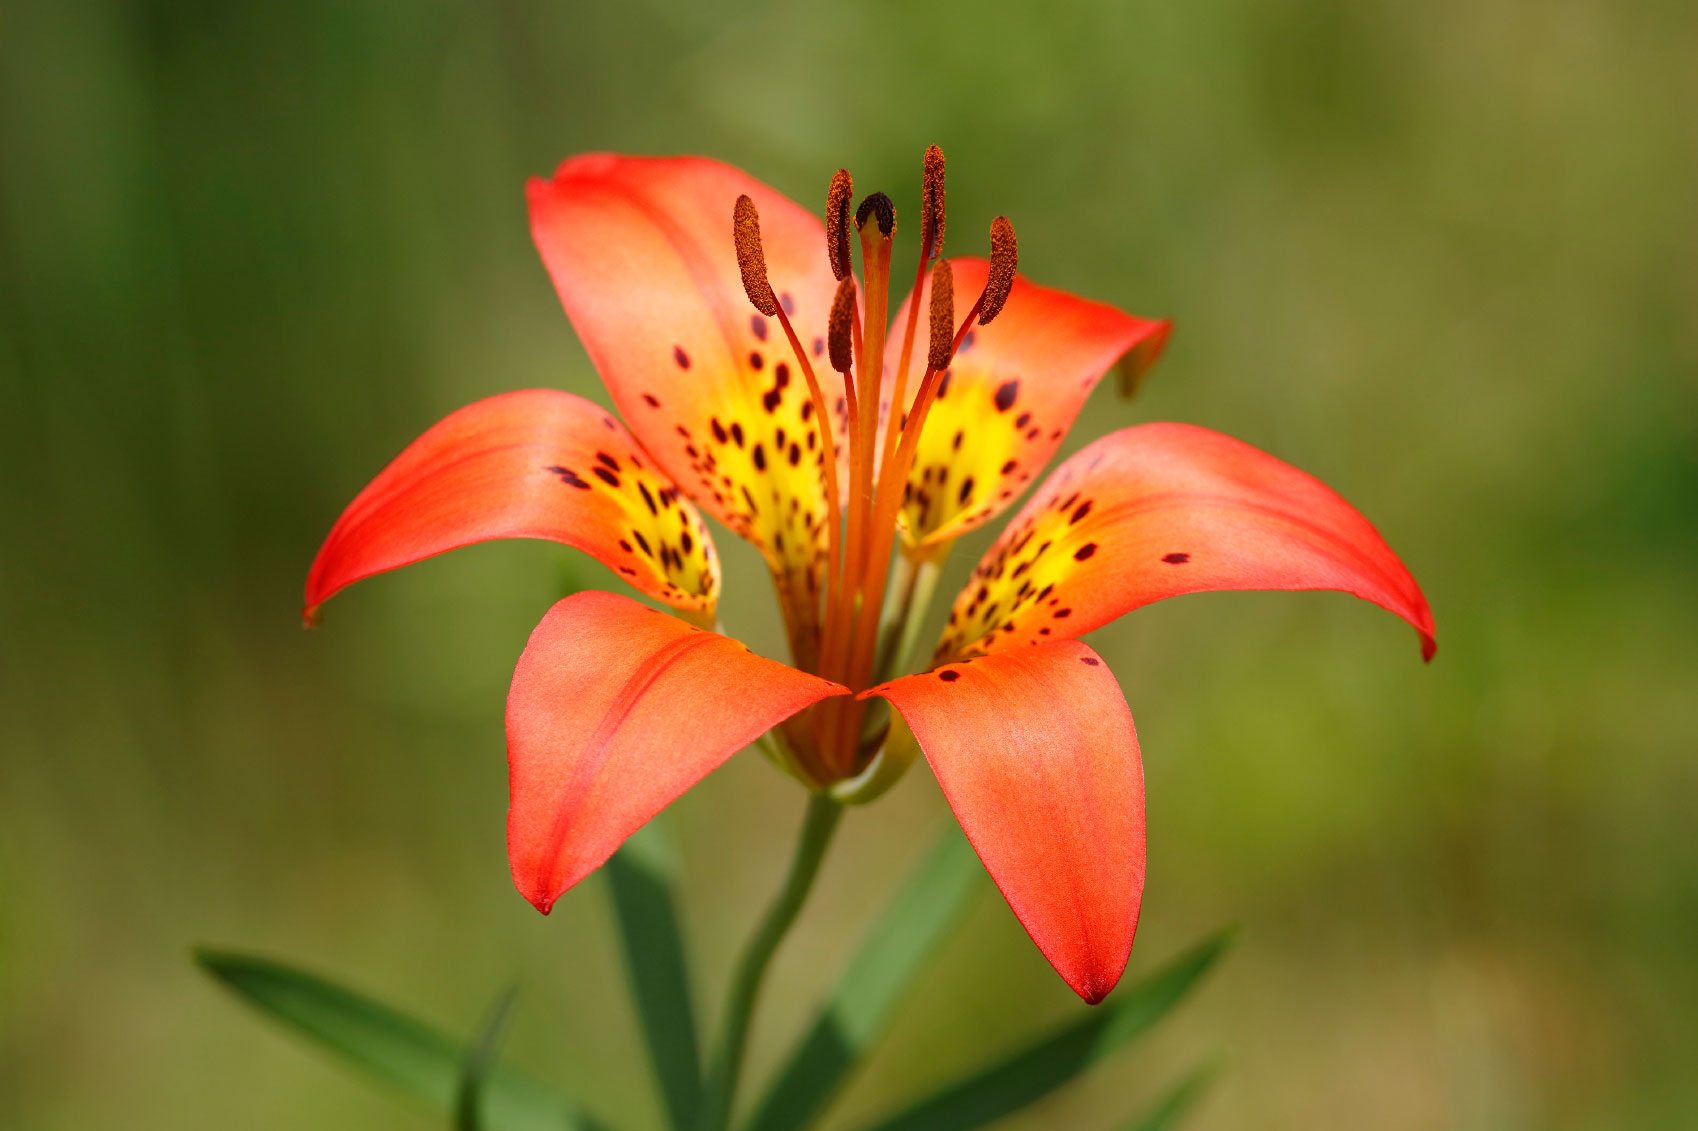 Growing Lilies From Bulbs: How To Care For Lily Flowers